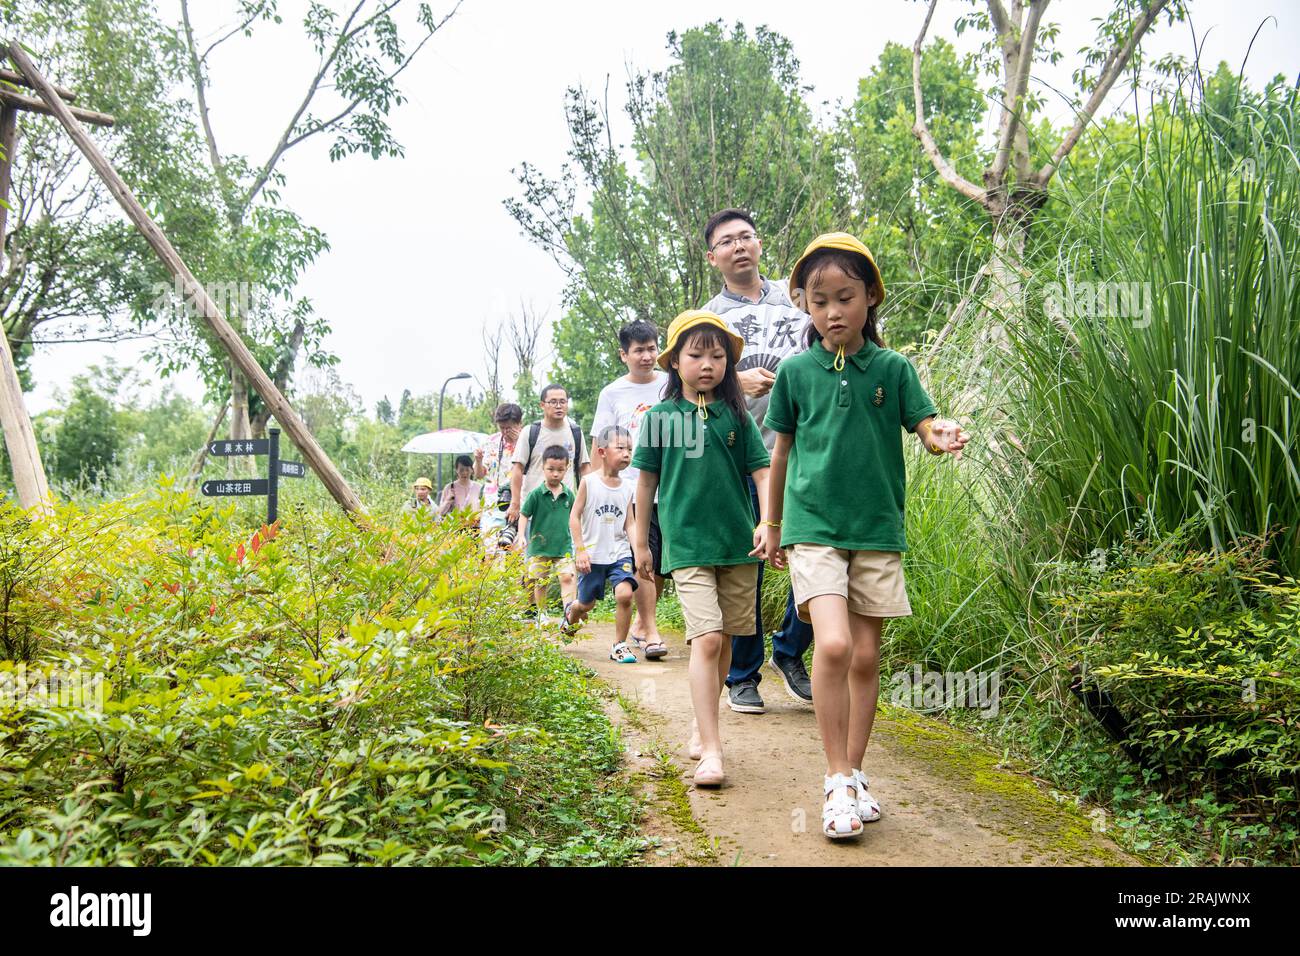 (230704) -- CHONGQING, July 4, 2023 (Xinhua) -- Parents and children visit Guangyang Isle for an ecological education tour in southwest China's Chongqing, July 3, 2023. Located at the most extensive green island in the upper reaches of the Yangtze River, Guangyang Isle, covering around 10 square km, has a vegetation coverage rate of over 90 percent, and 594 species of plants and 452 species of animals have been recorded. But its ecological system and biodiversity were severely damaged due to a number of aggressive real estate projects that had lasted for years. In 2017, the commercial activit Stock Photo